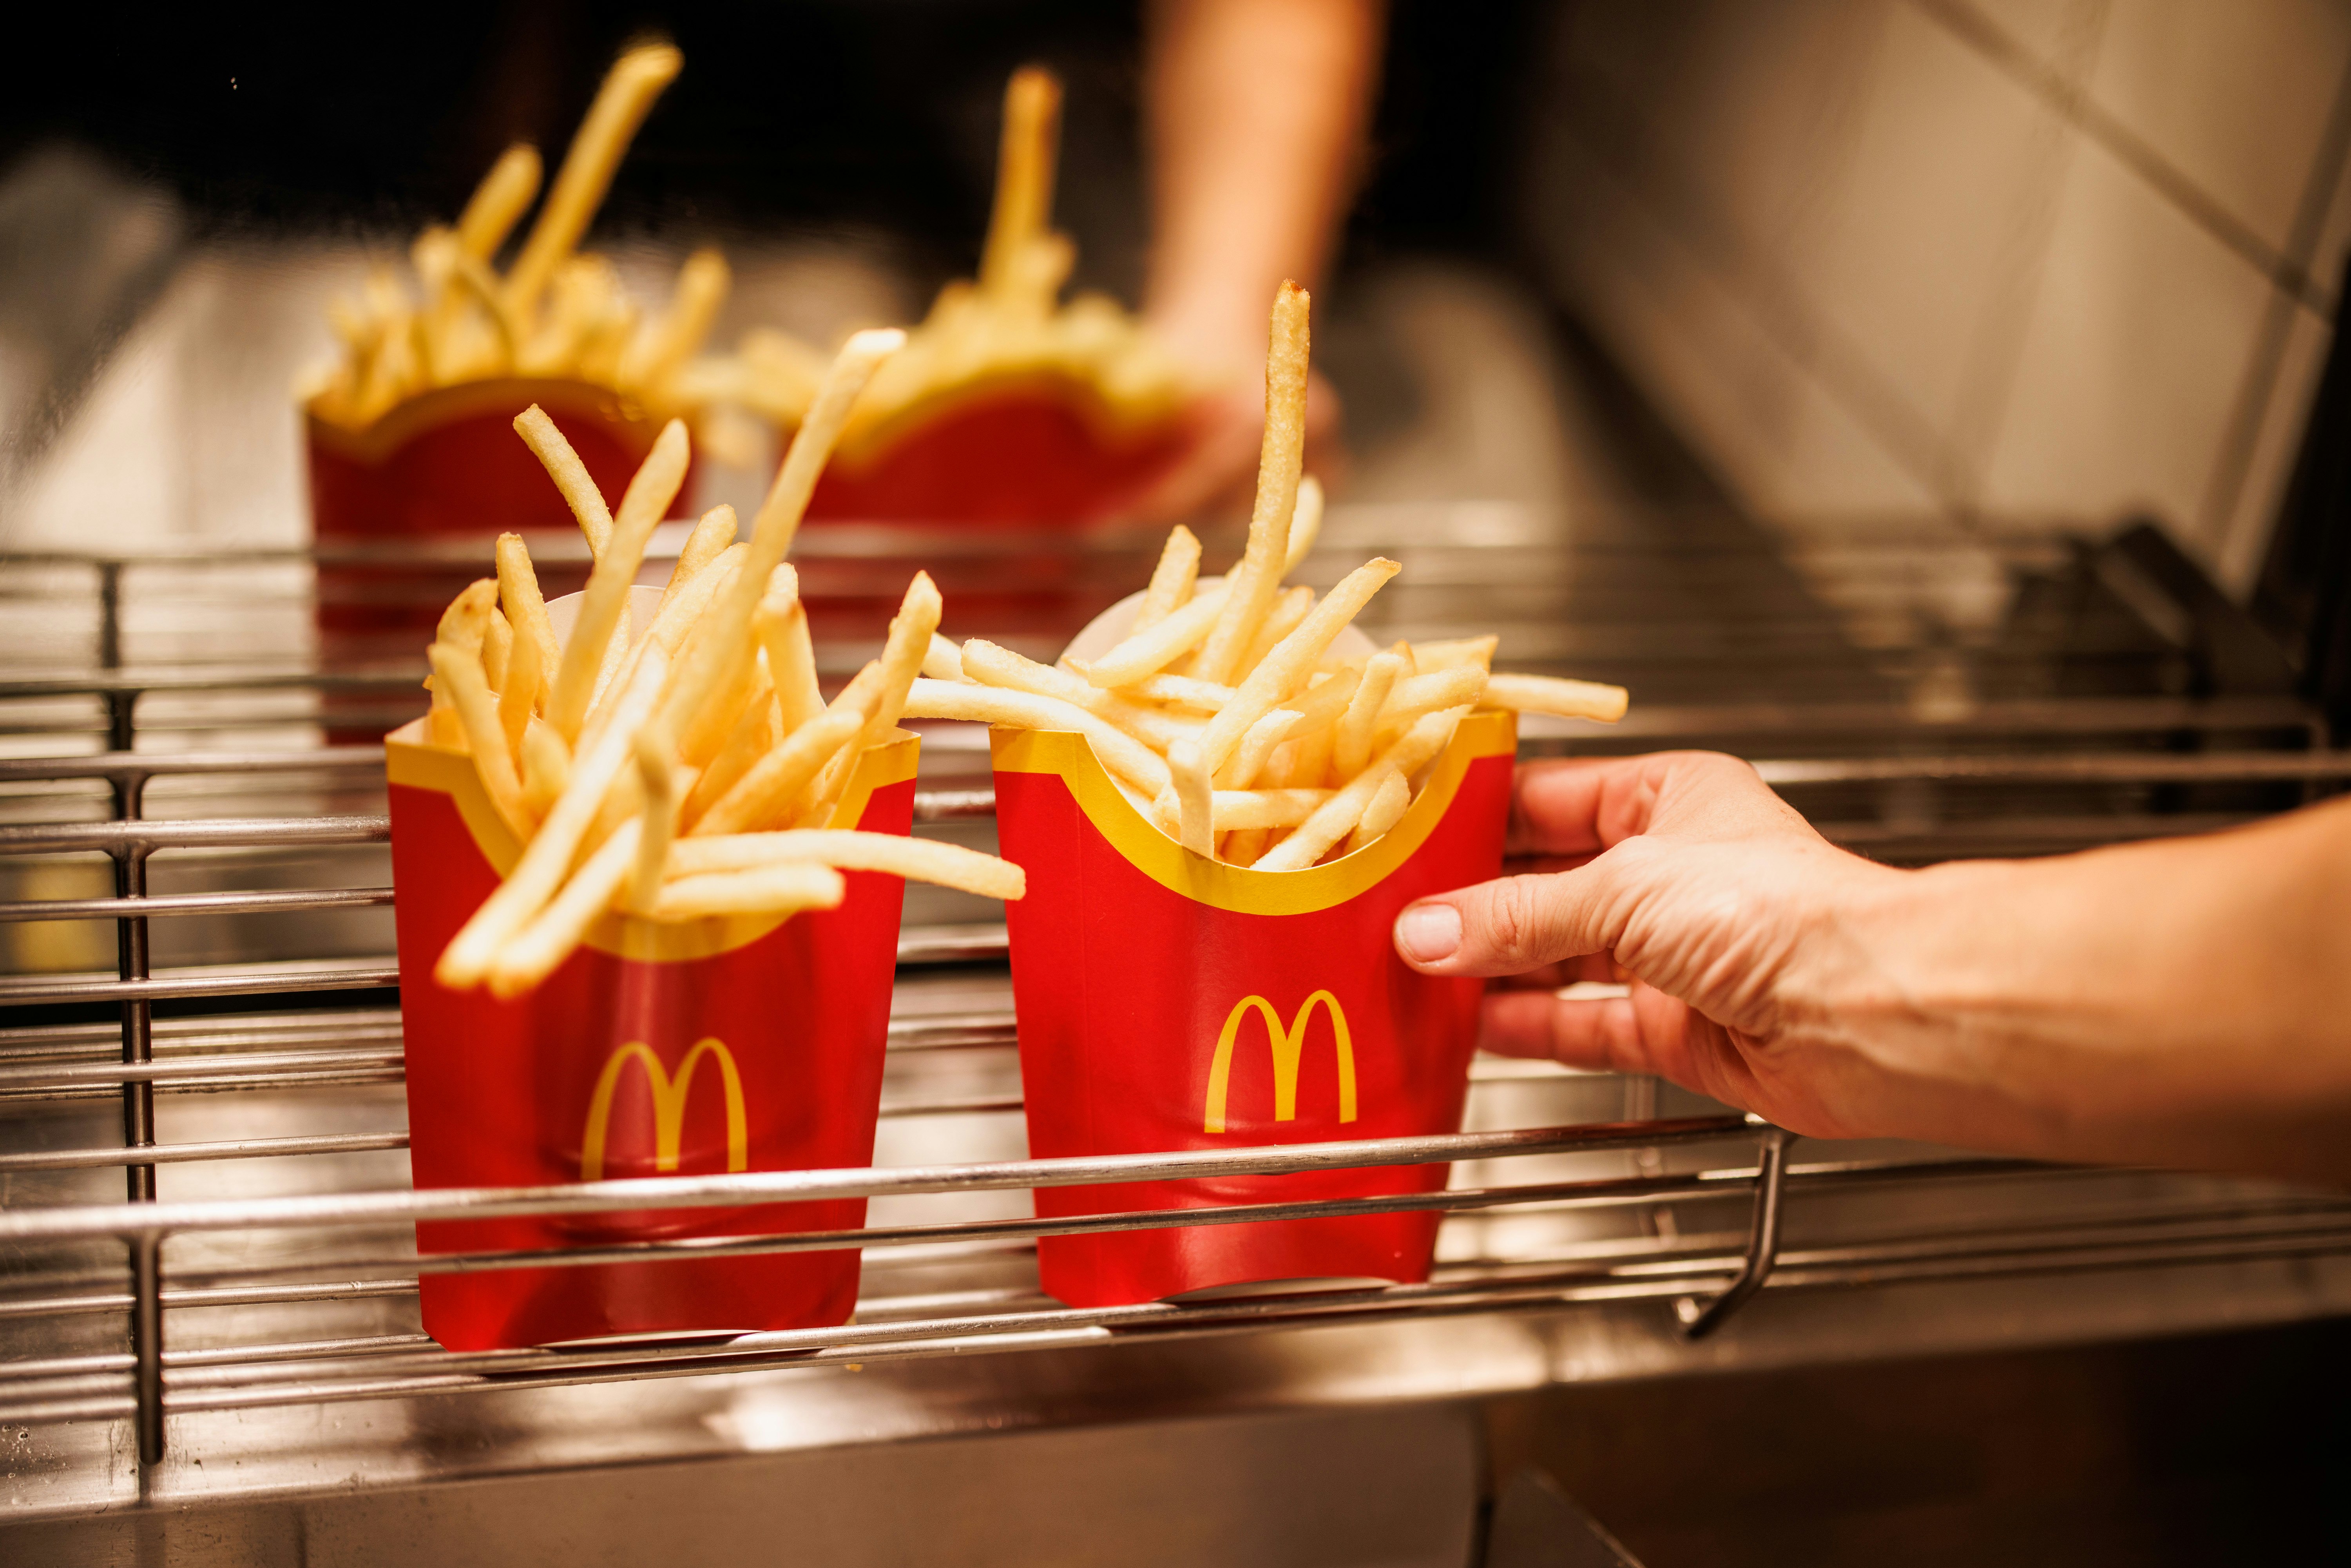 McDonalds Is Offering Free Fries For The Rest Of 2022 pic